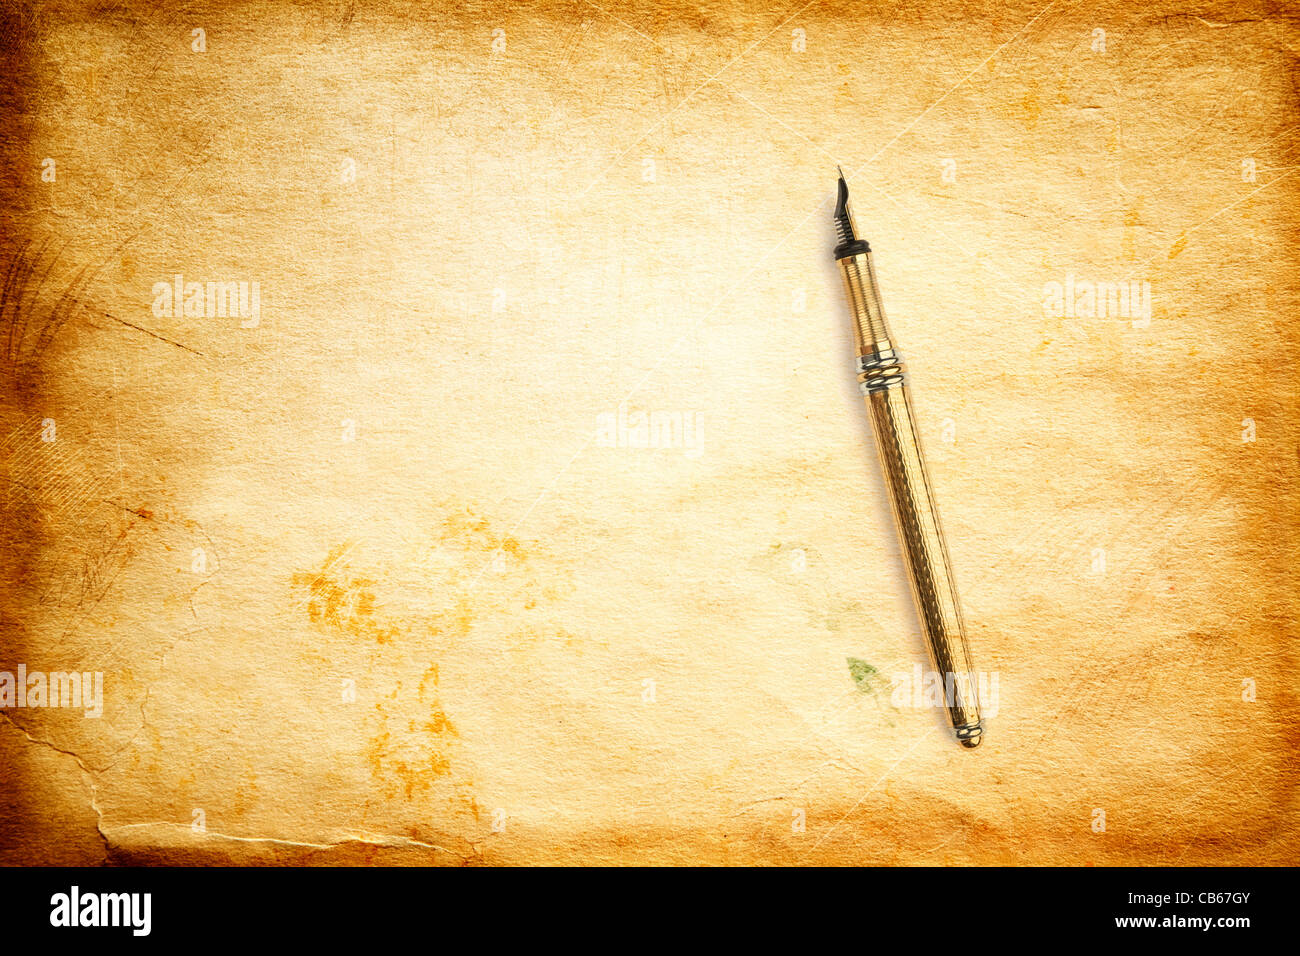 grunge background and golden pen Stock Photo